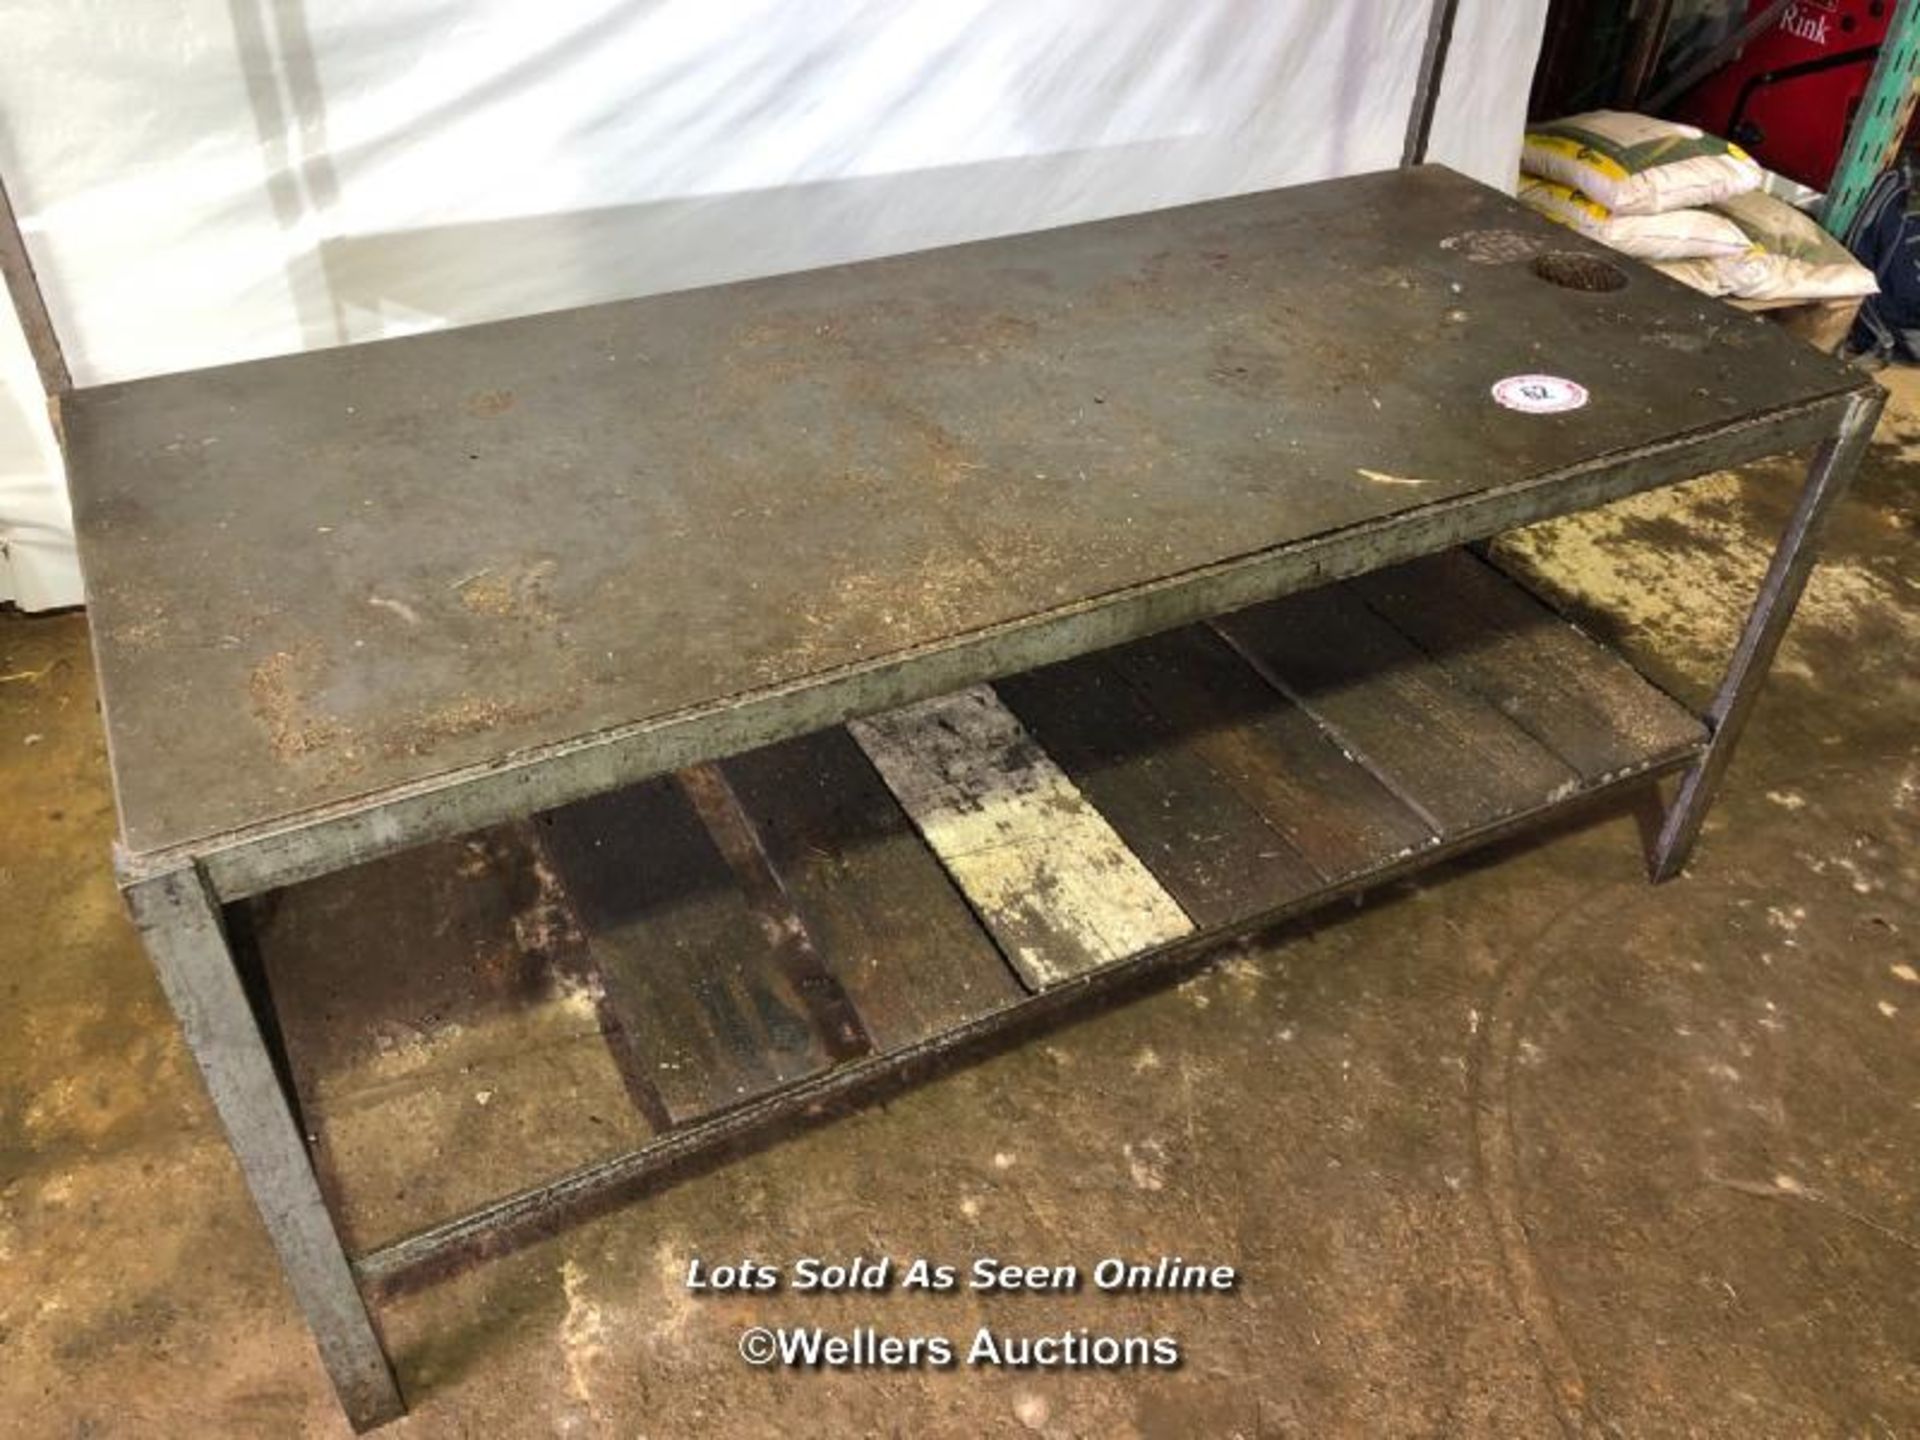 TWO TIER INDUSTRIAL WORK BENCH, 80CM (H, TO TOP OF BENCH) X 75CM (D)180CM (W) - Image 2 of 2